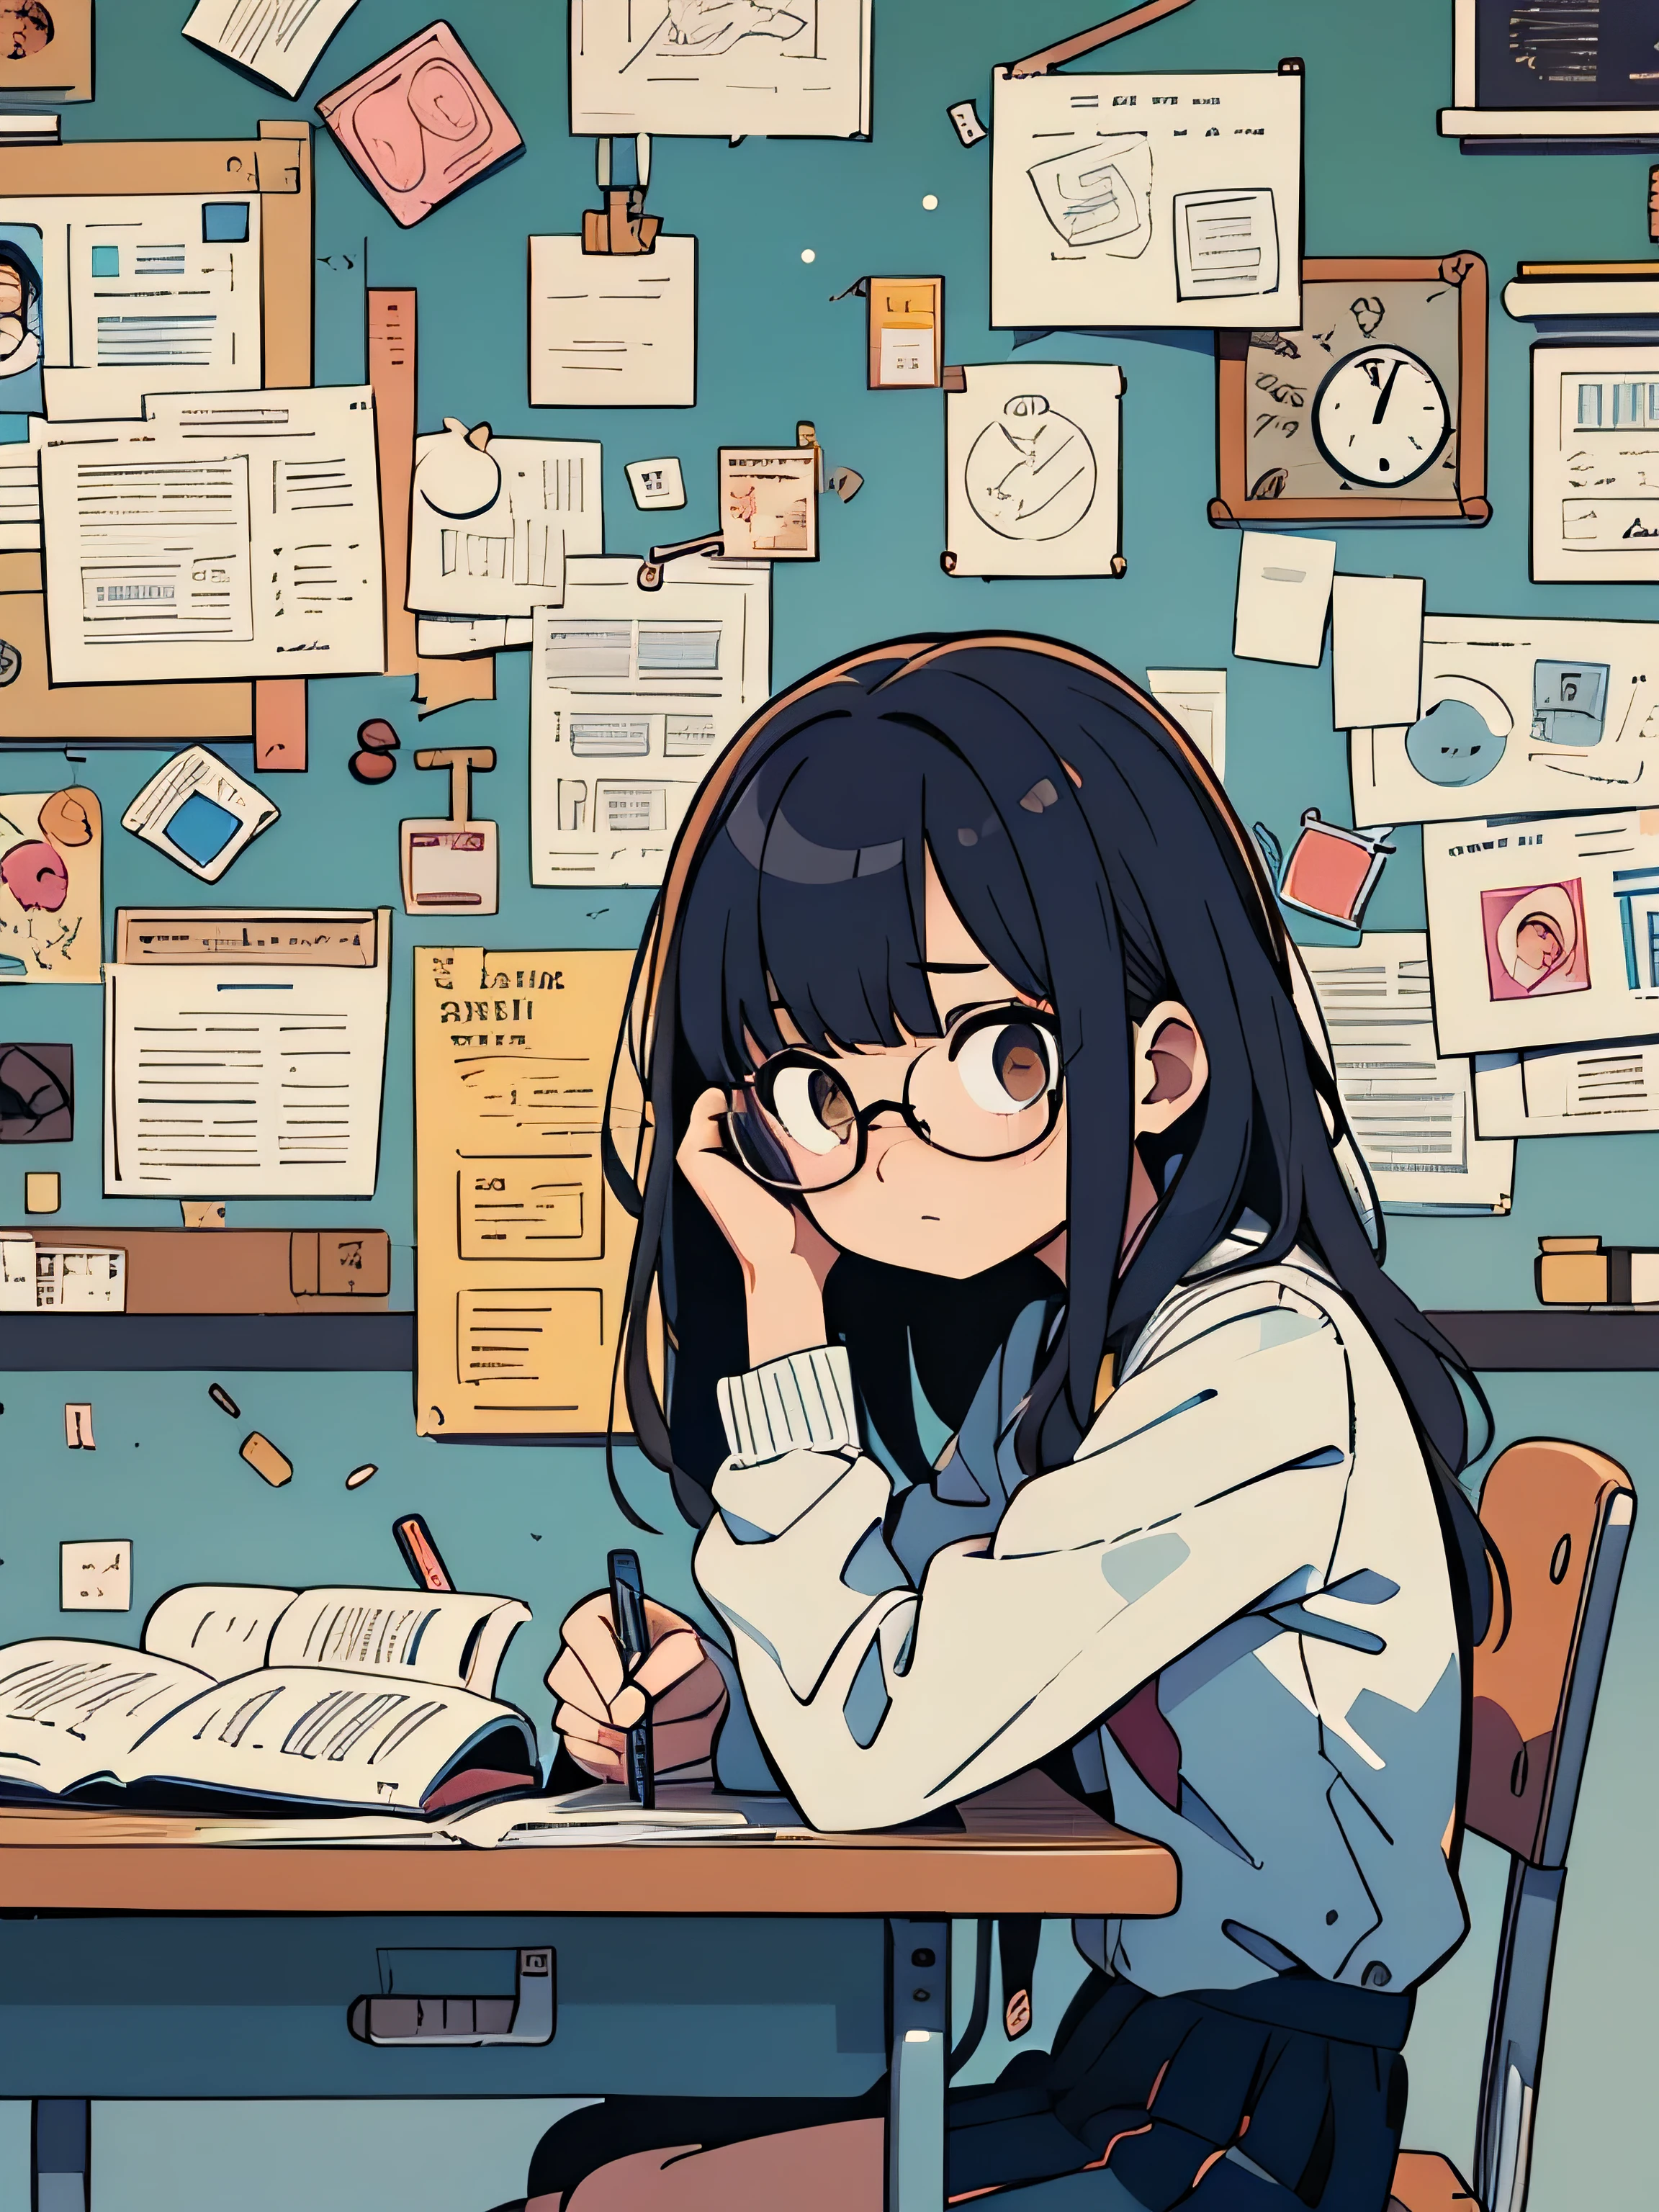 A young girl, a university student, sitting in a classroom during a lecture. She appears bored and disinterested, holding a fountain pen, and wearing glasses. The scene captures a moment of monotony, with the girl dozing off, symbolizing the tedium of the class. Emphasize the details of the glasses, the fountain pen, and the weariness on the student's face. The background should convey the classroom setting. Create a high-quality image that conveys the essence of a disengaged student, highlighting the elements of boredom, drowsiness, and scholarly tools.